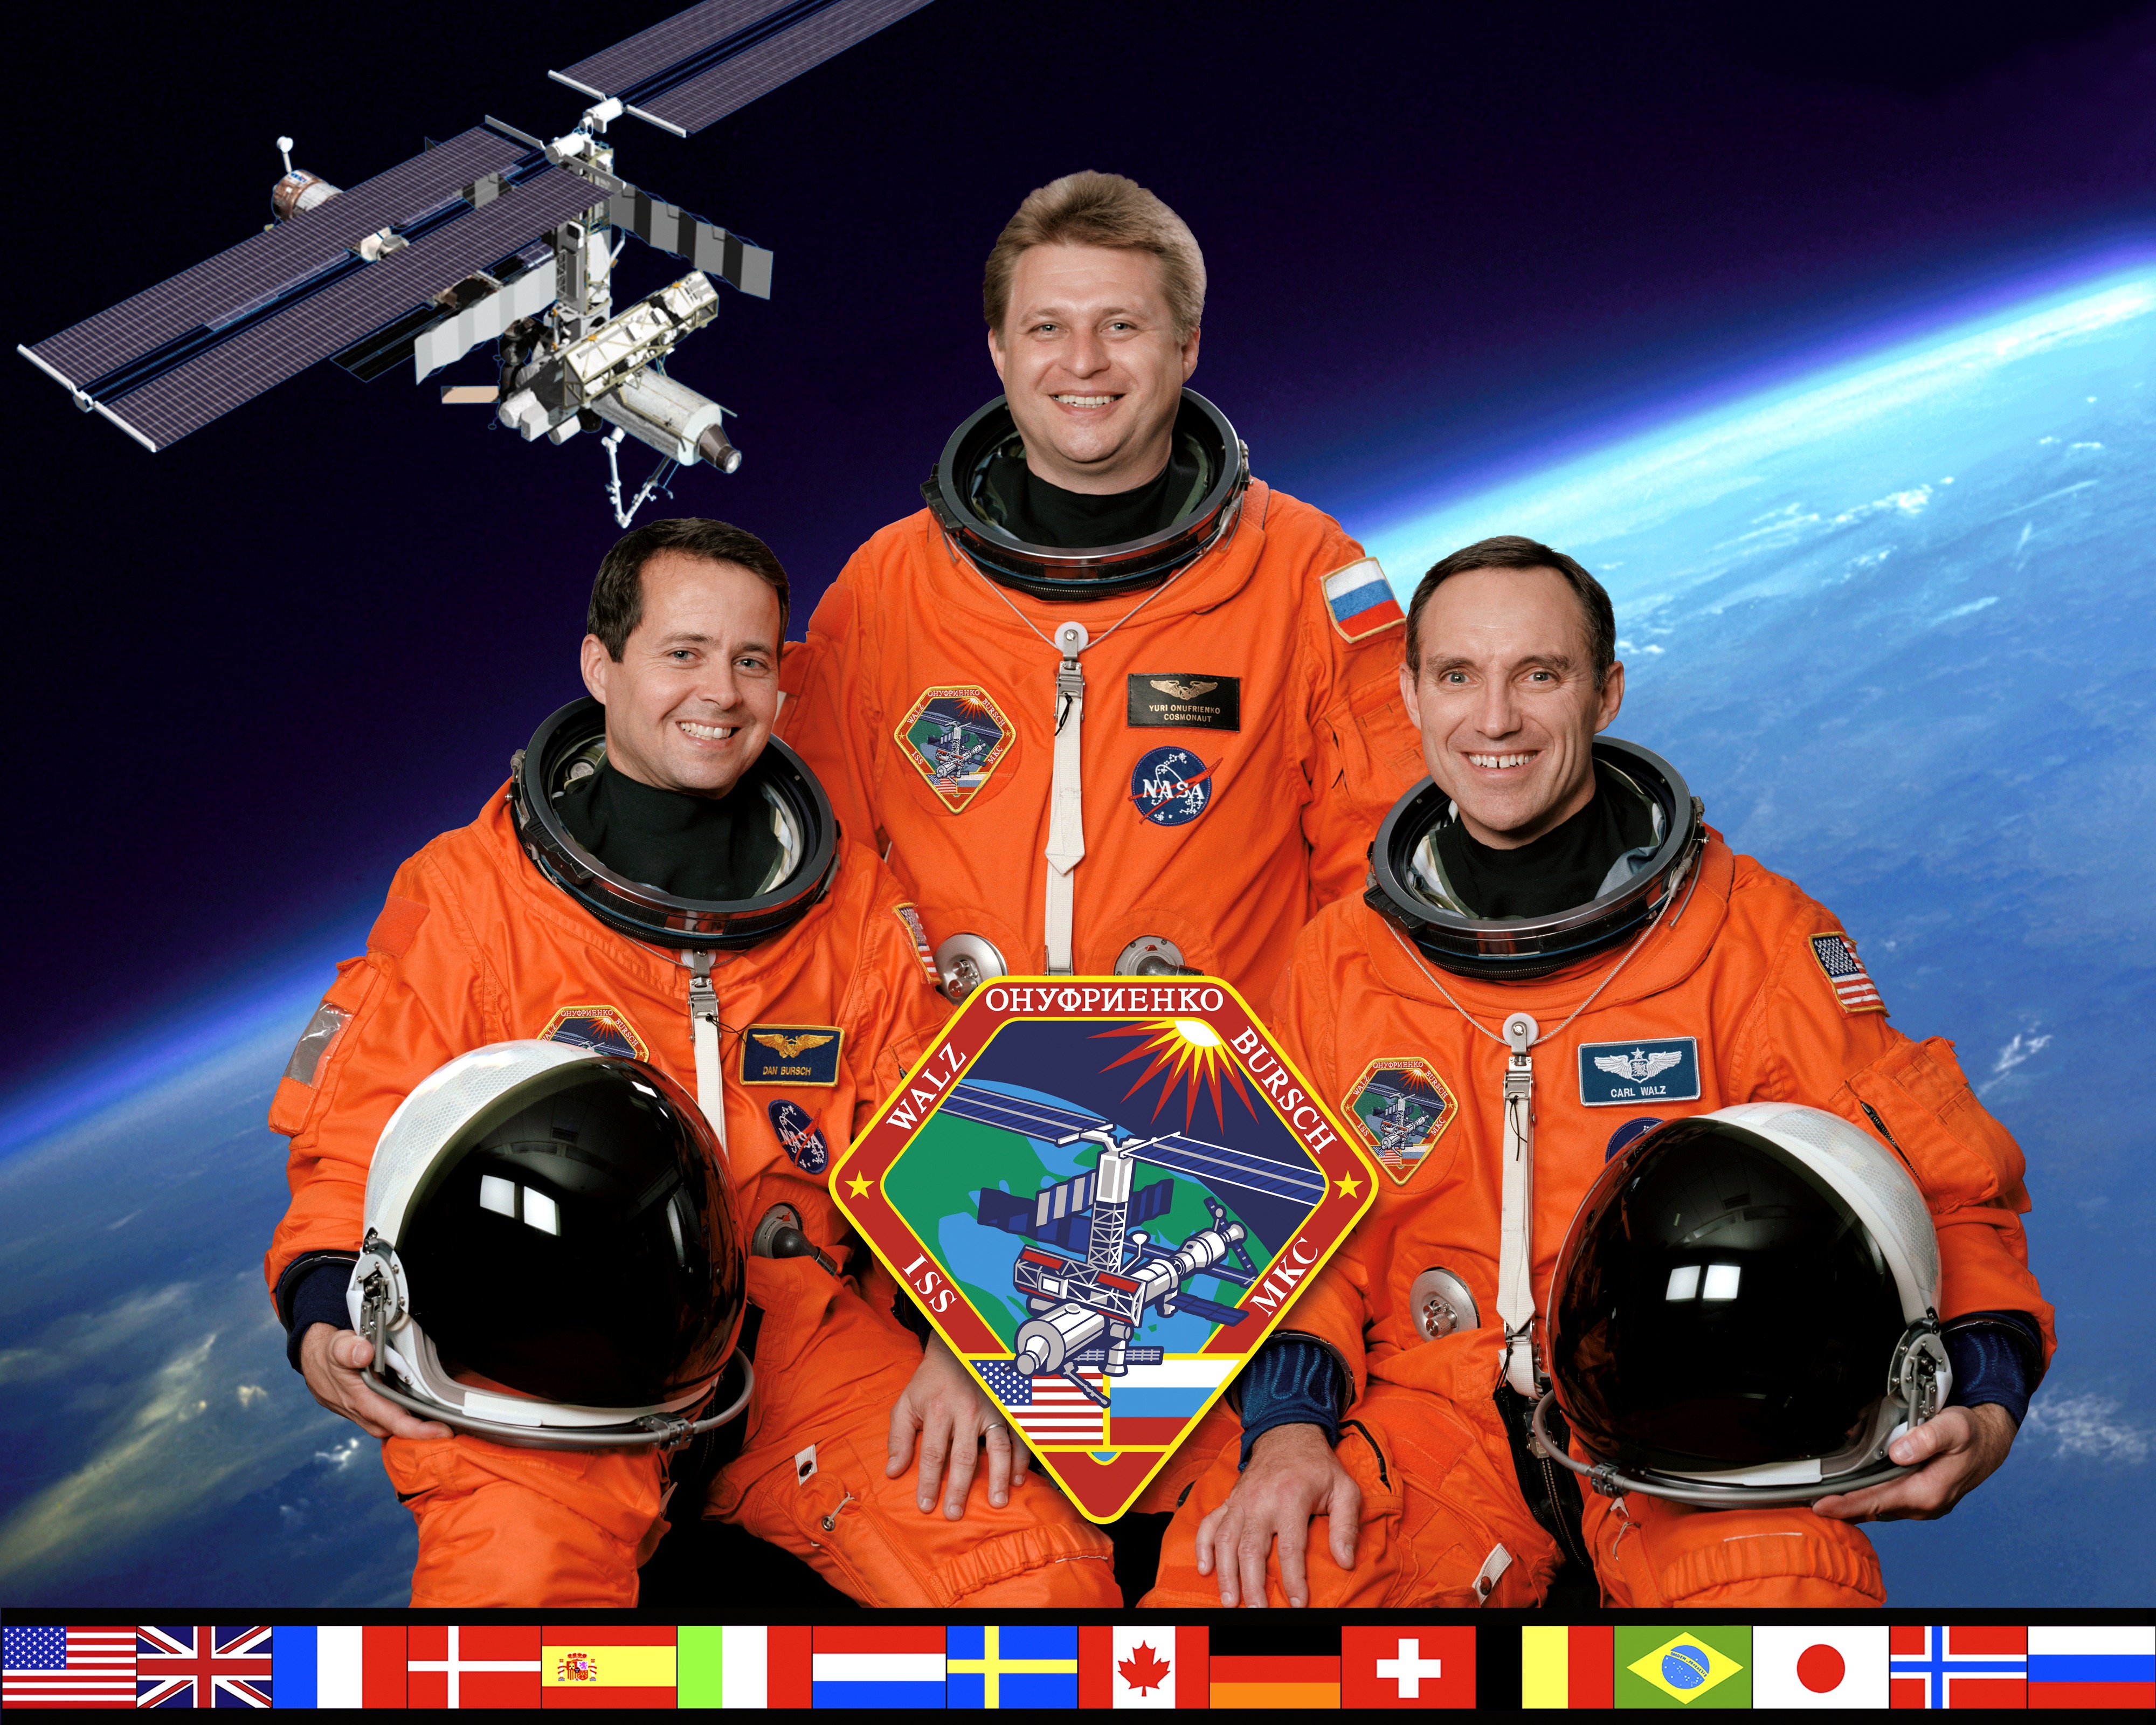 Expedition 4 Official Crew Portrait